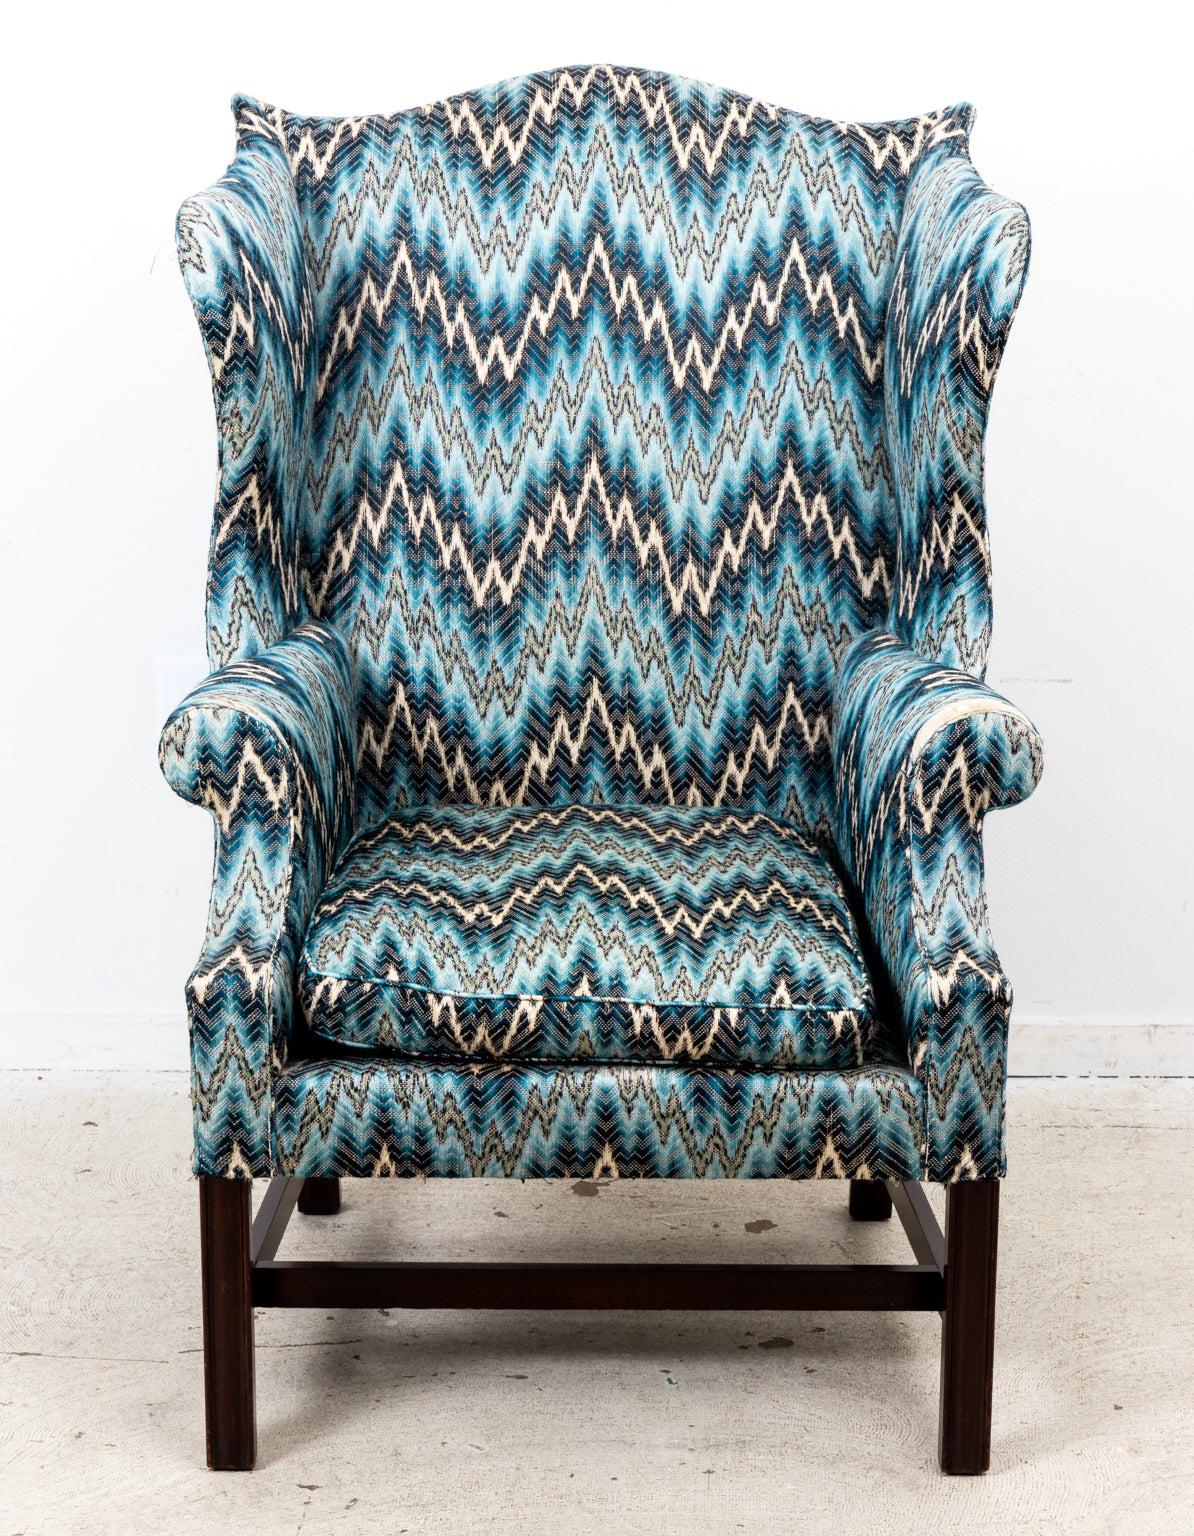 Federal style wing chair in blue flame stitch upholstery. Made in England. Please note wear consistent with age.
 